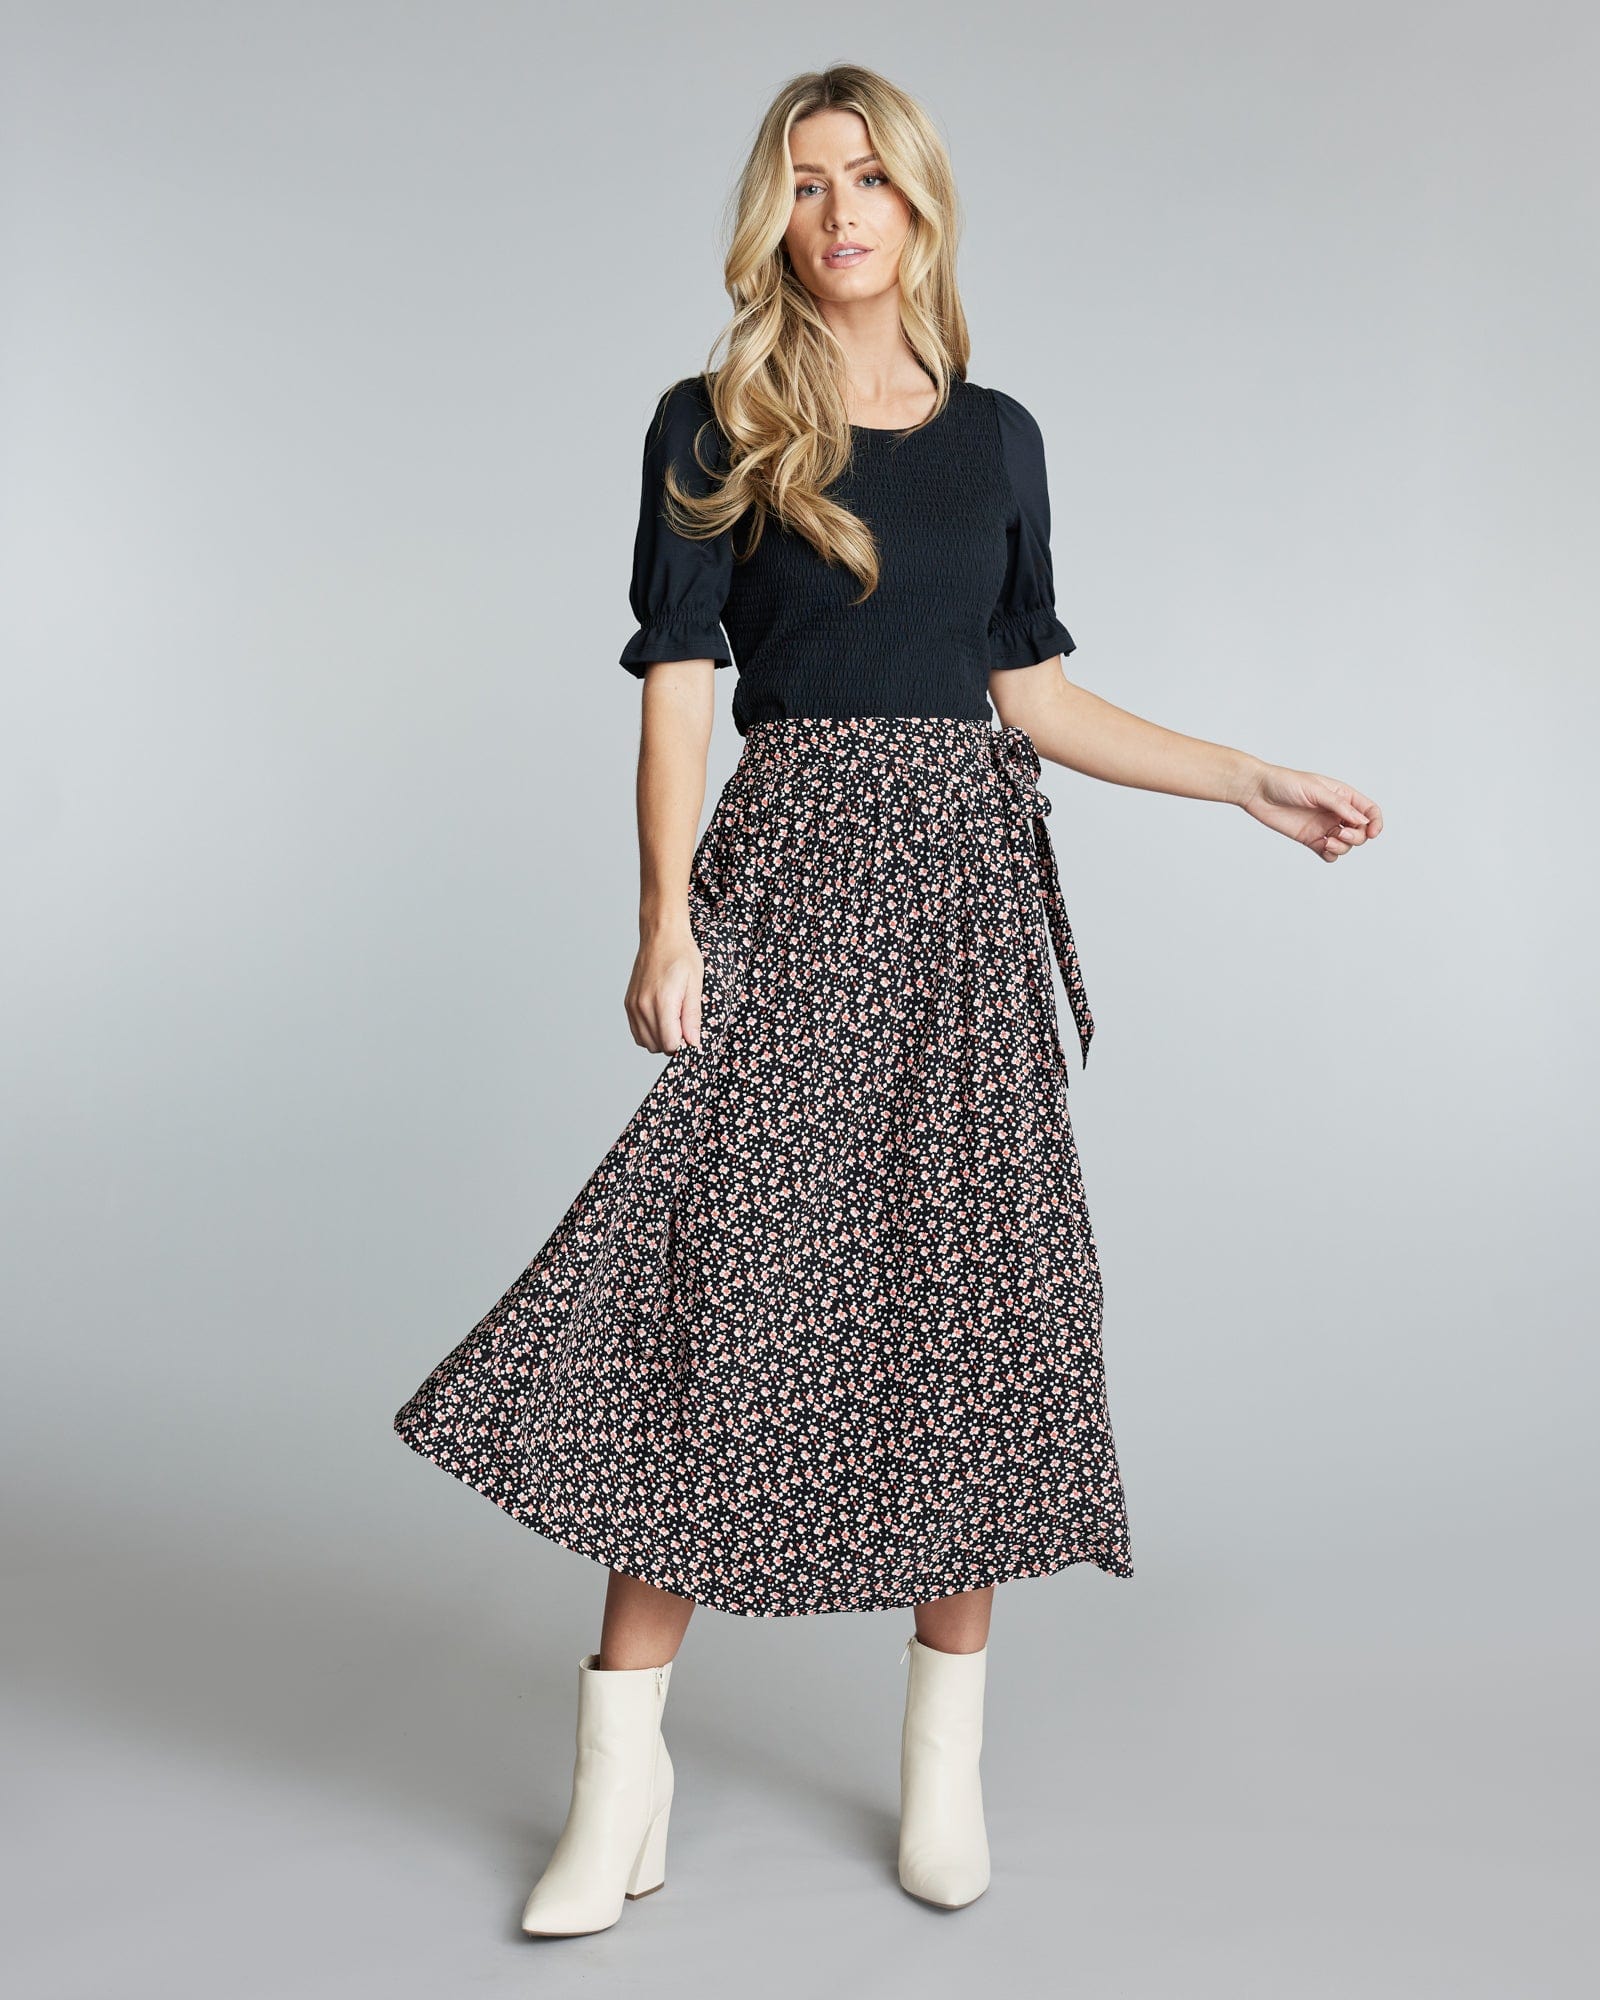 Woman in a midi length floral skirt